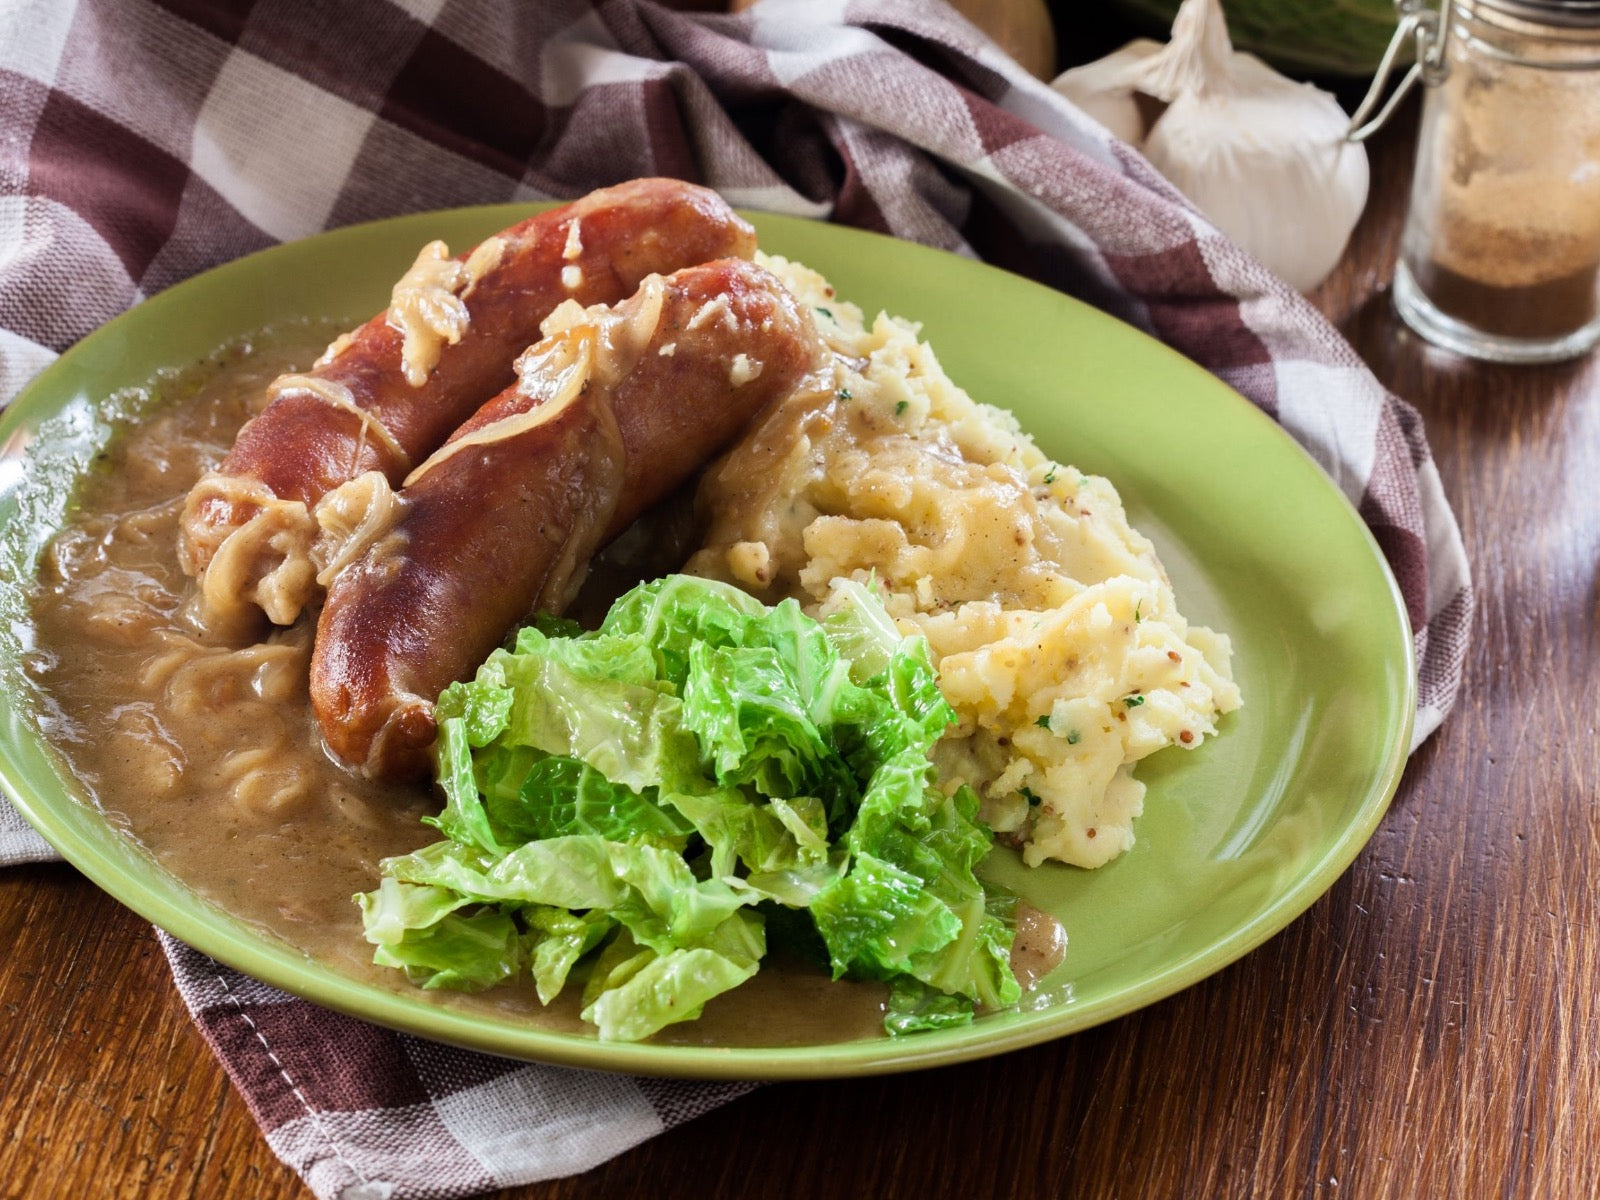 British Bangers And Mash Made With Our Bison Sausage - Beck & Bulow